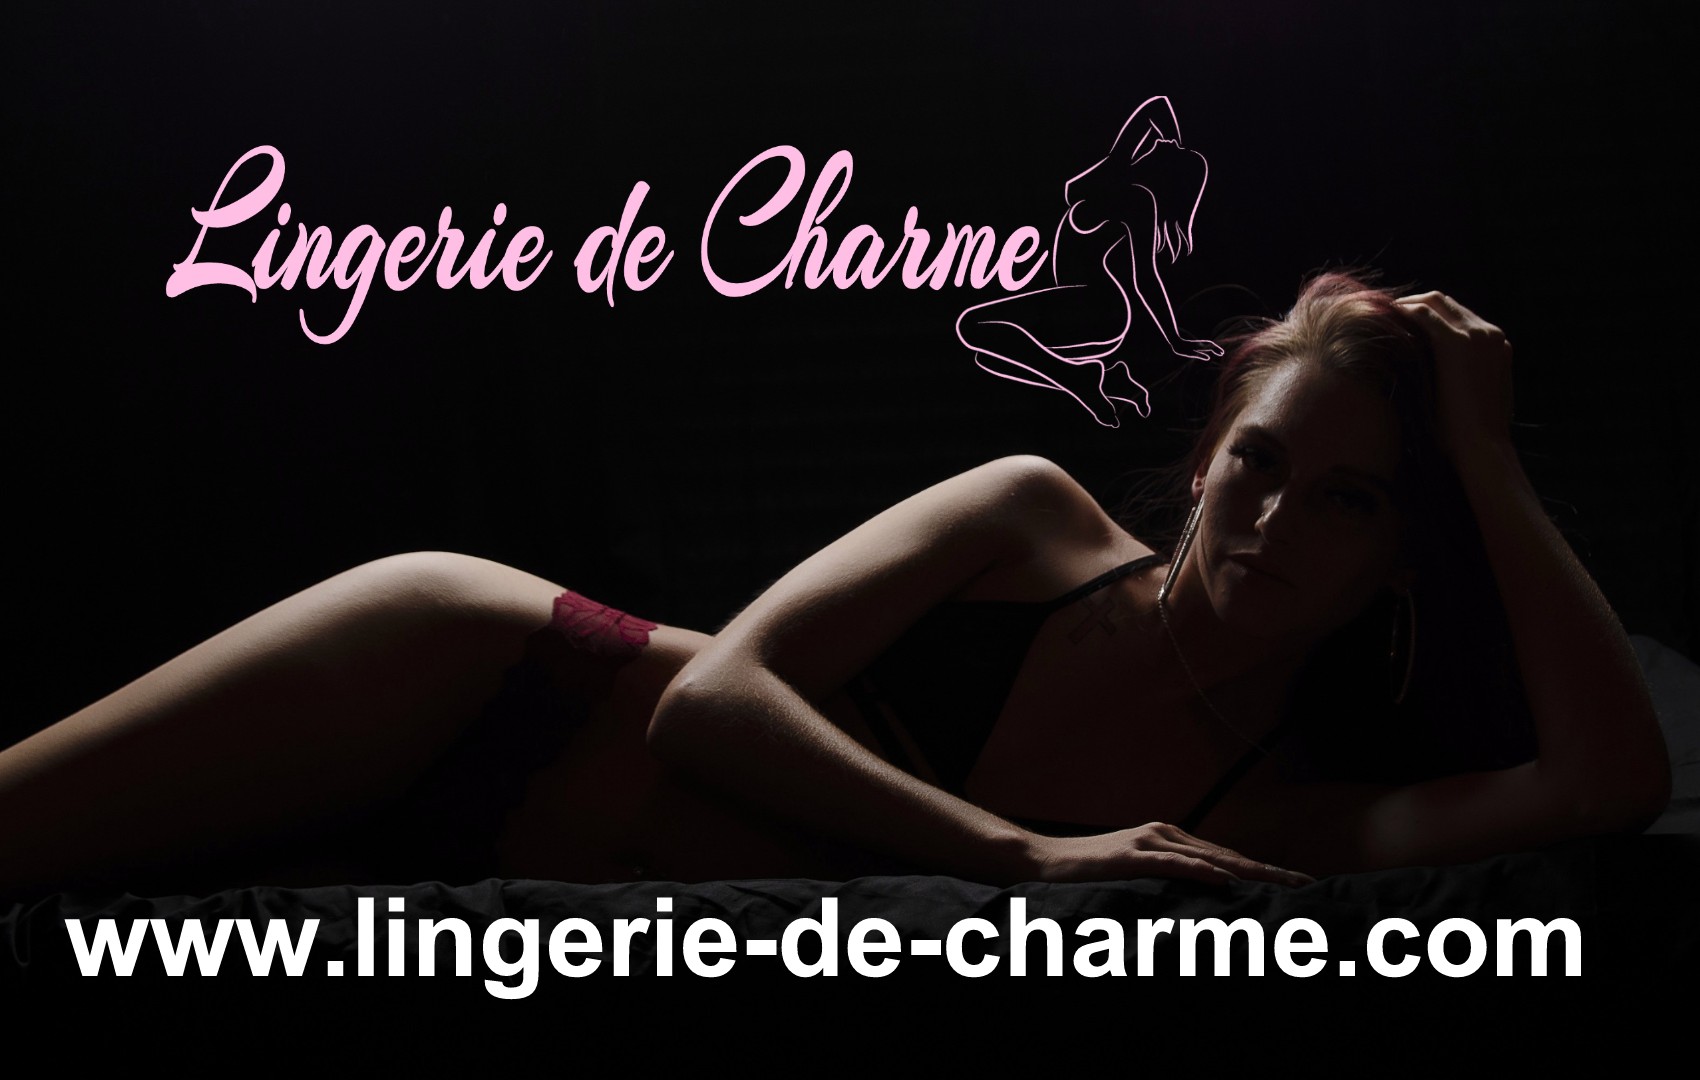 LINGERIE DE CHARME CHASSORS 16 - LINGERIE SEXY CHASSORS 16